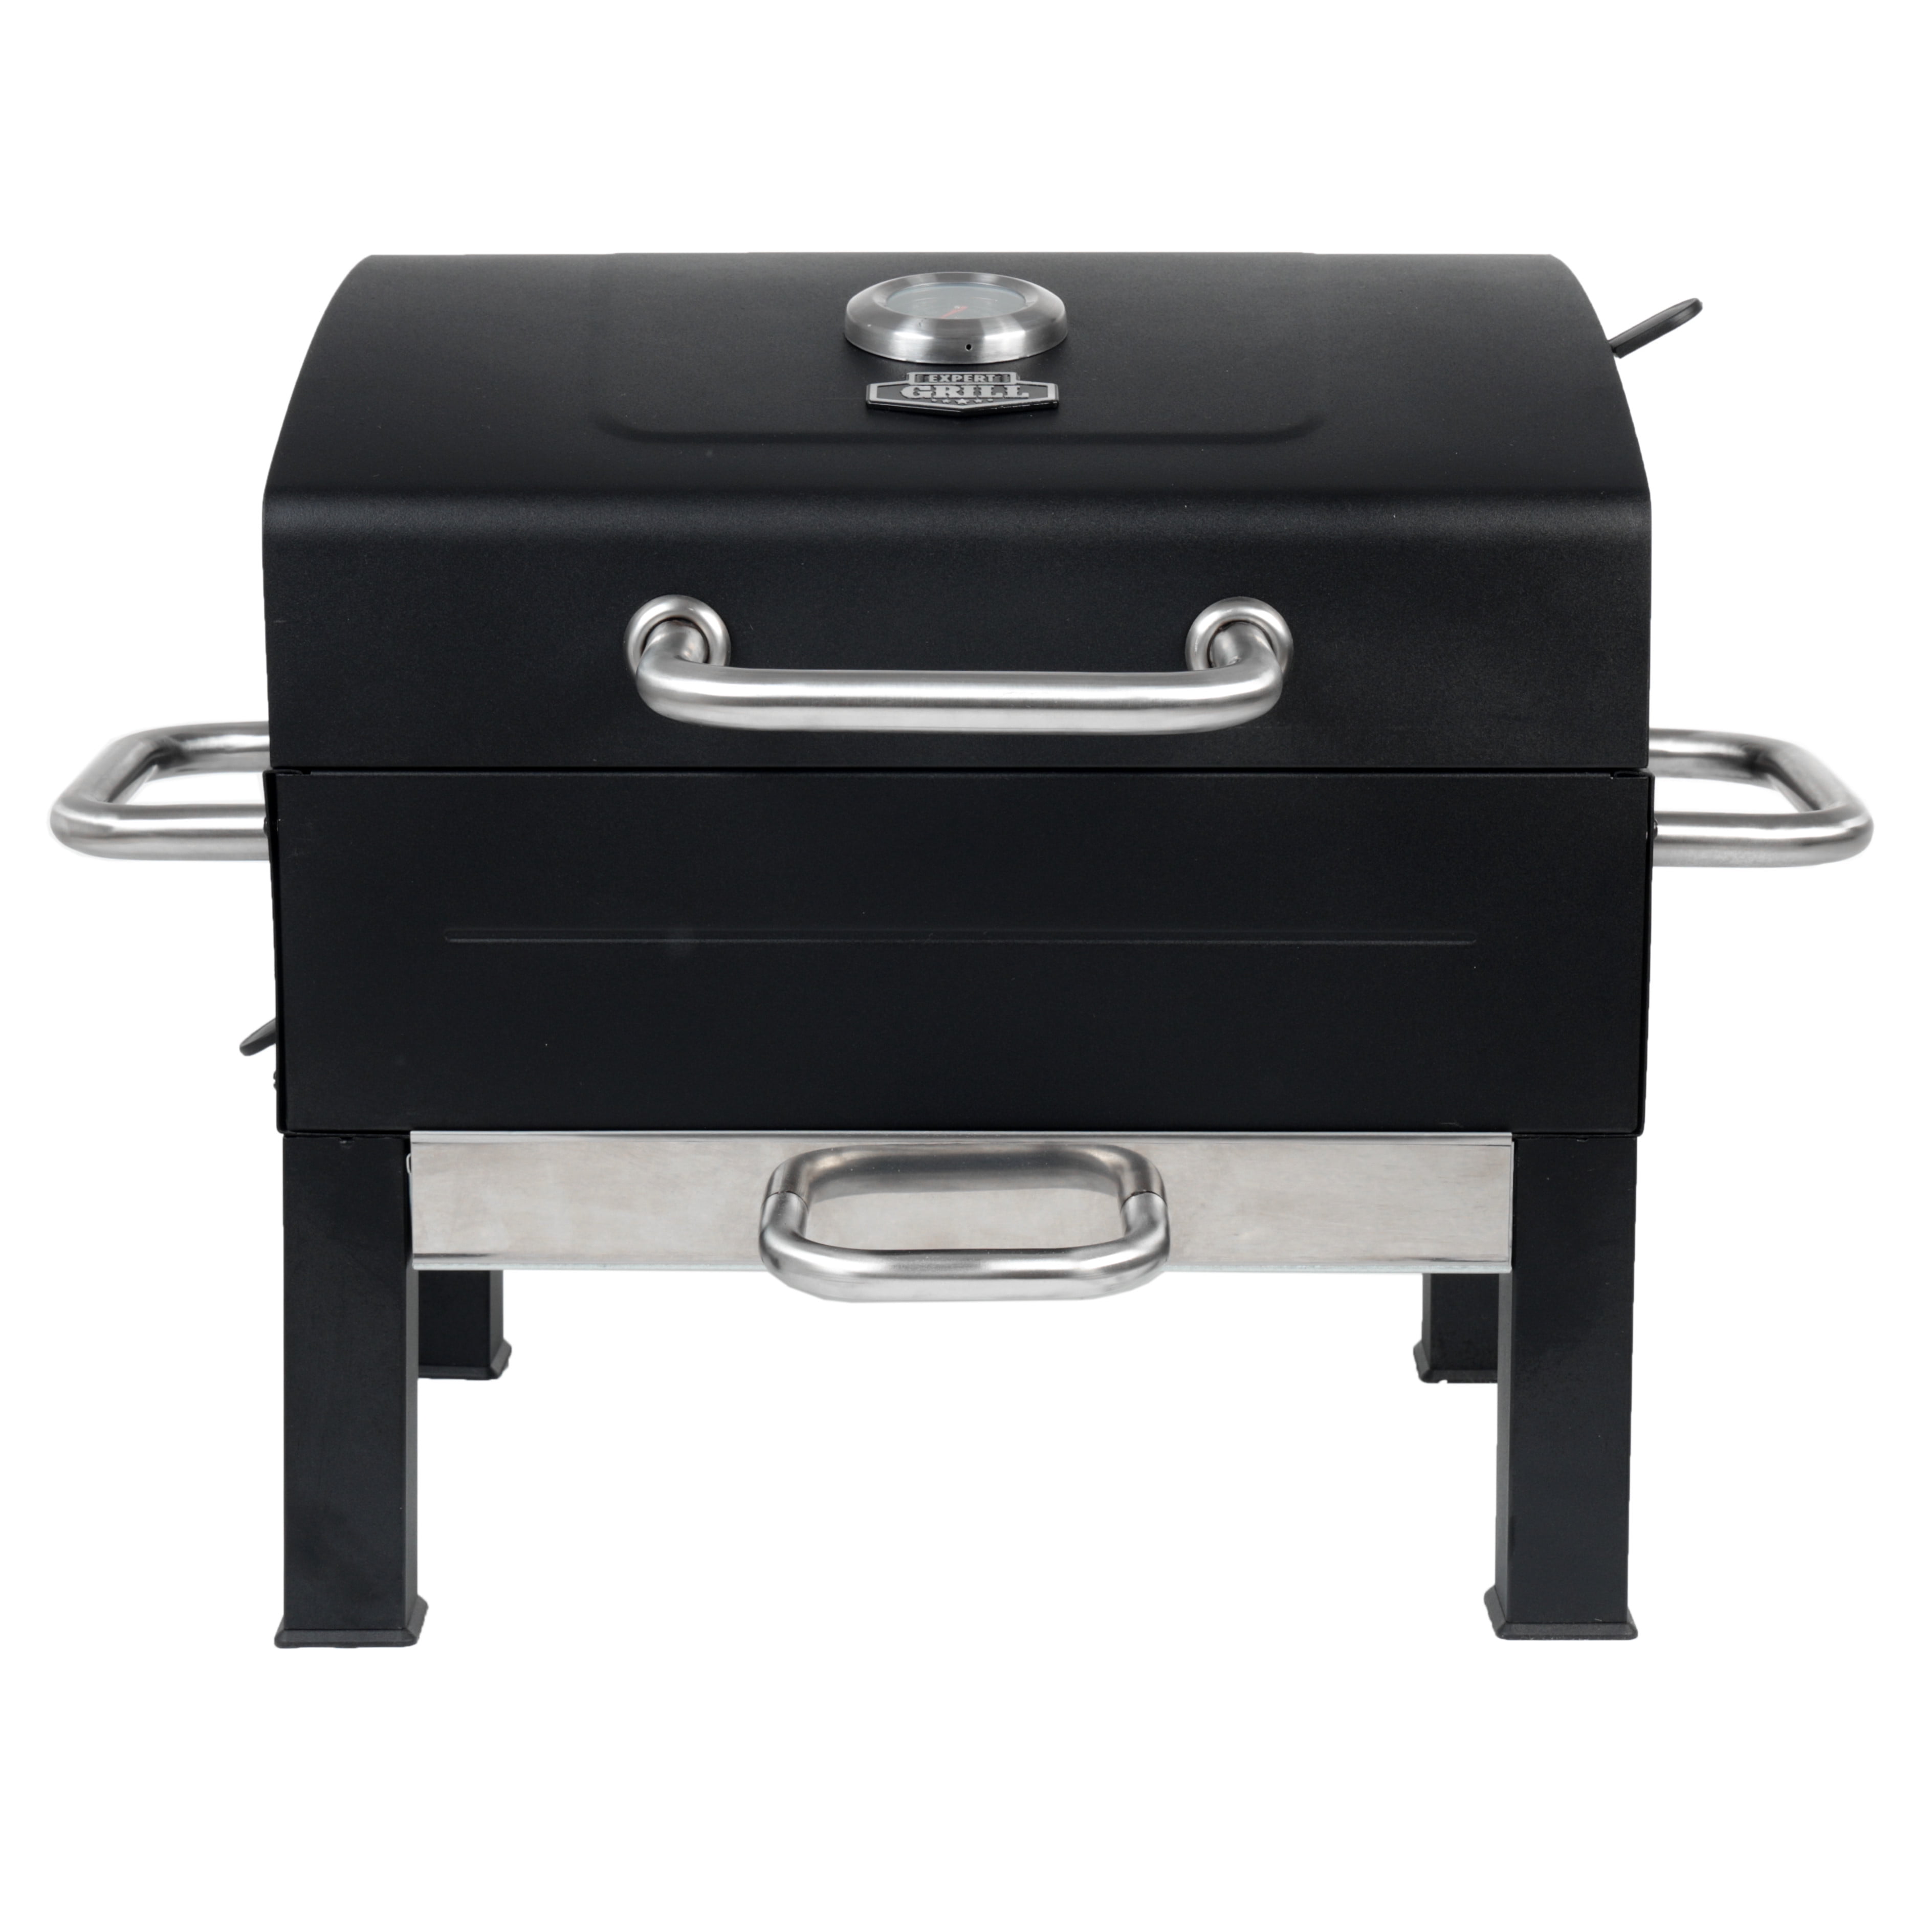 Expert Grill Premium Portable Charcoal Grill Black And Stainless Steel Walmart Com Walmart Com